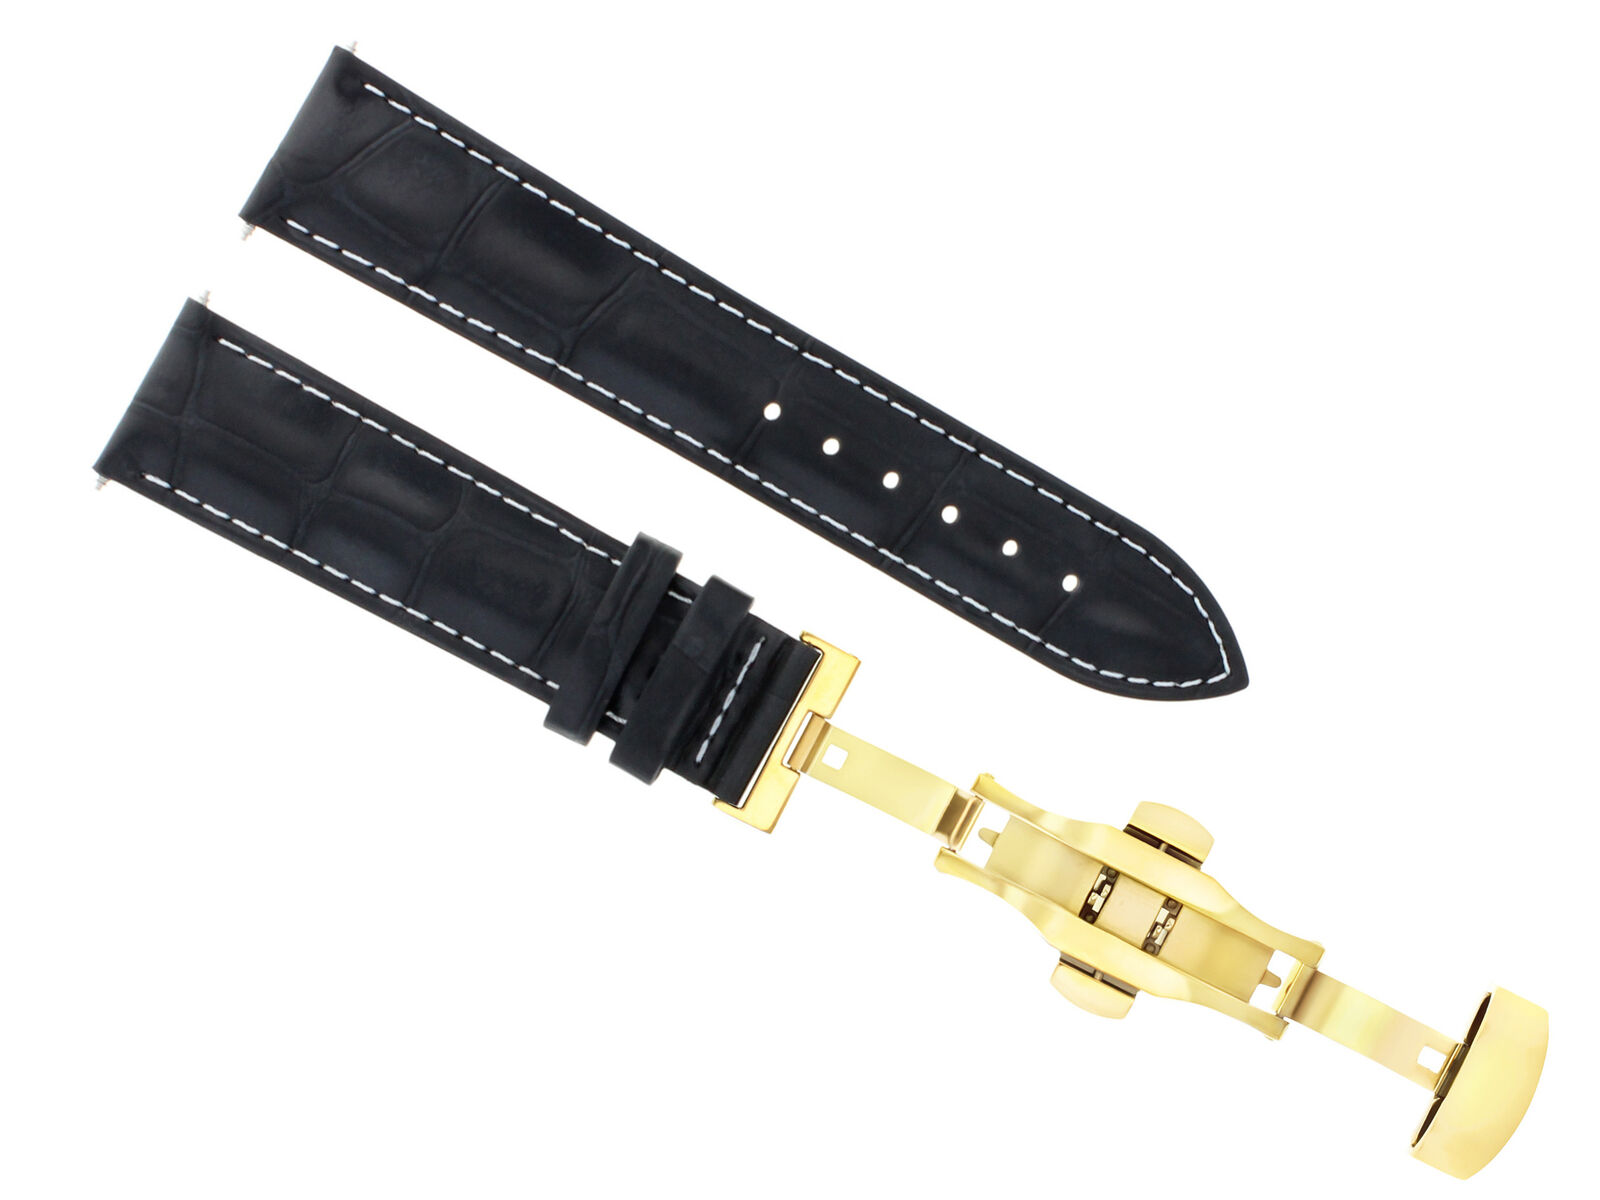 18MM LEATHER WATCH BAND STRAP FOR MOVADO WATCH DEPLOYMENT CLASP BLACK WS GOLD